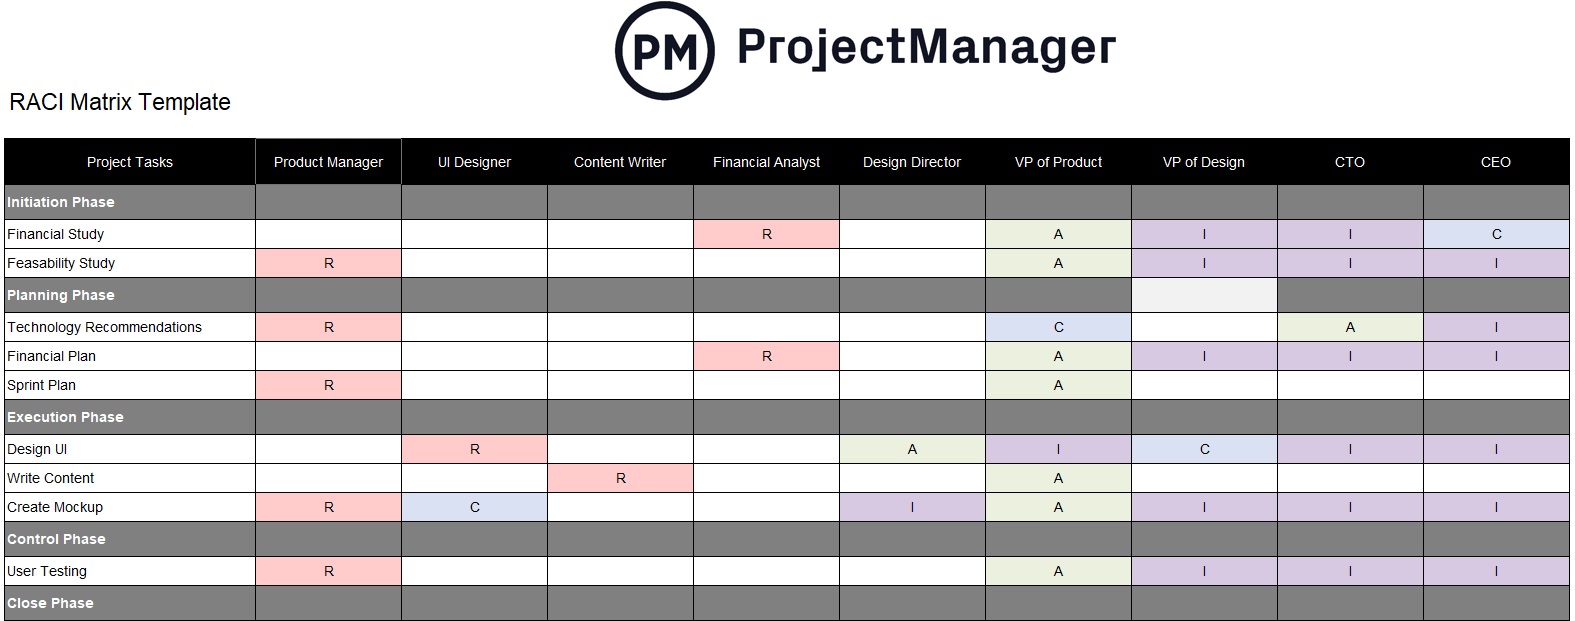 RACI chart example in ProjectManager